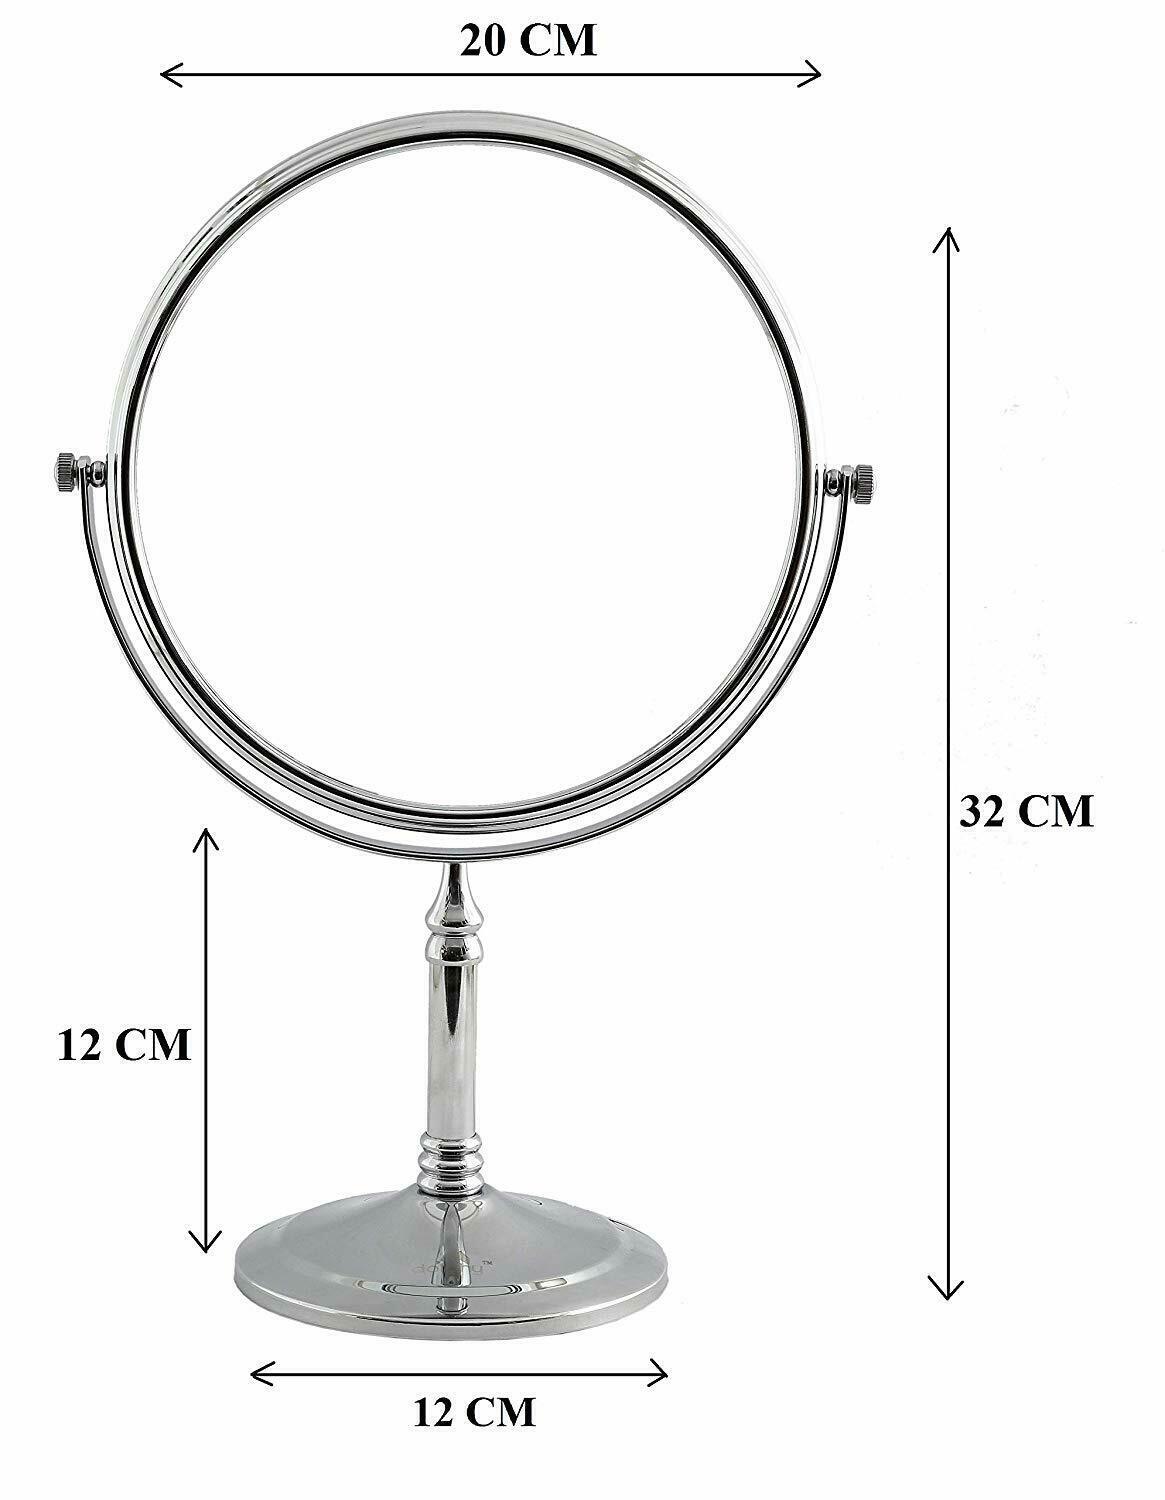 5X Magnifying Mirror Tabletop - Silver